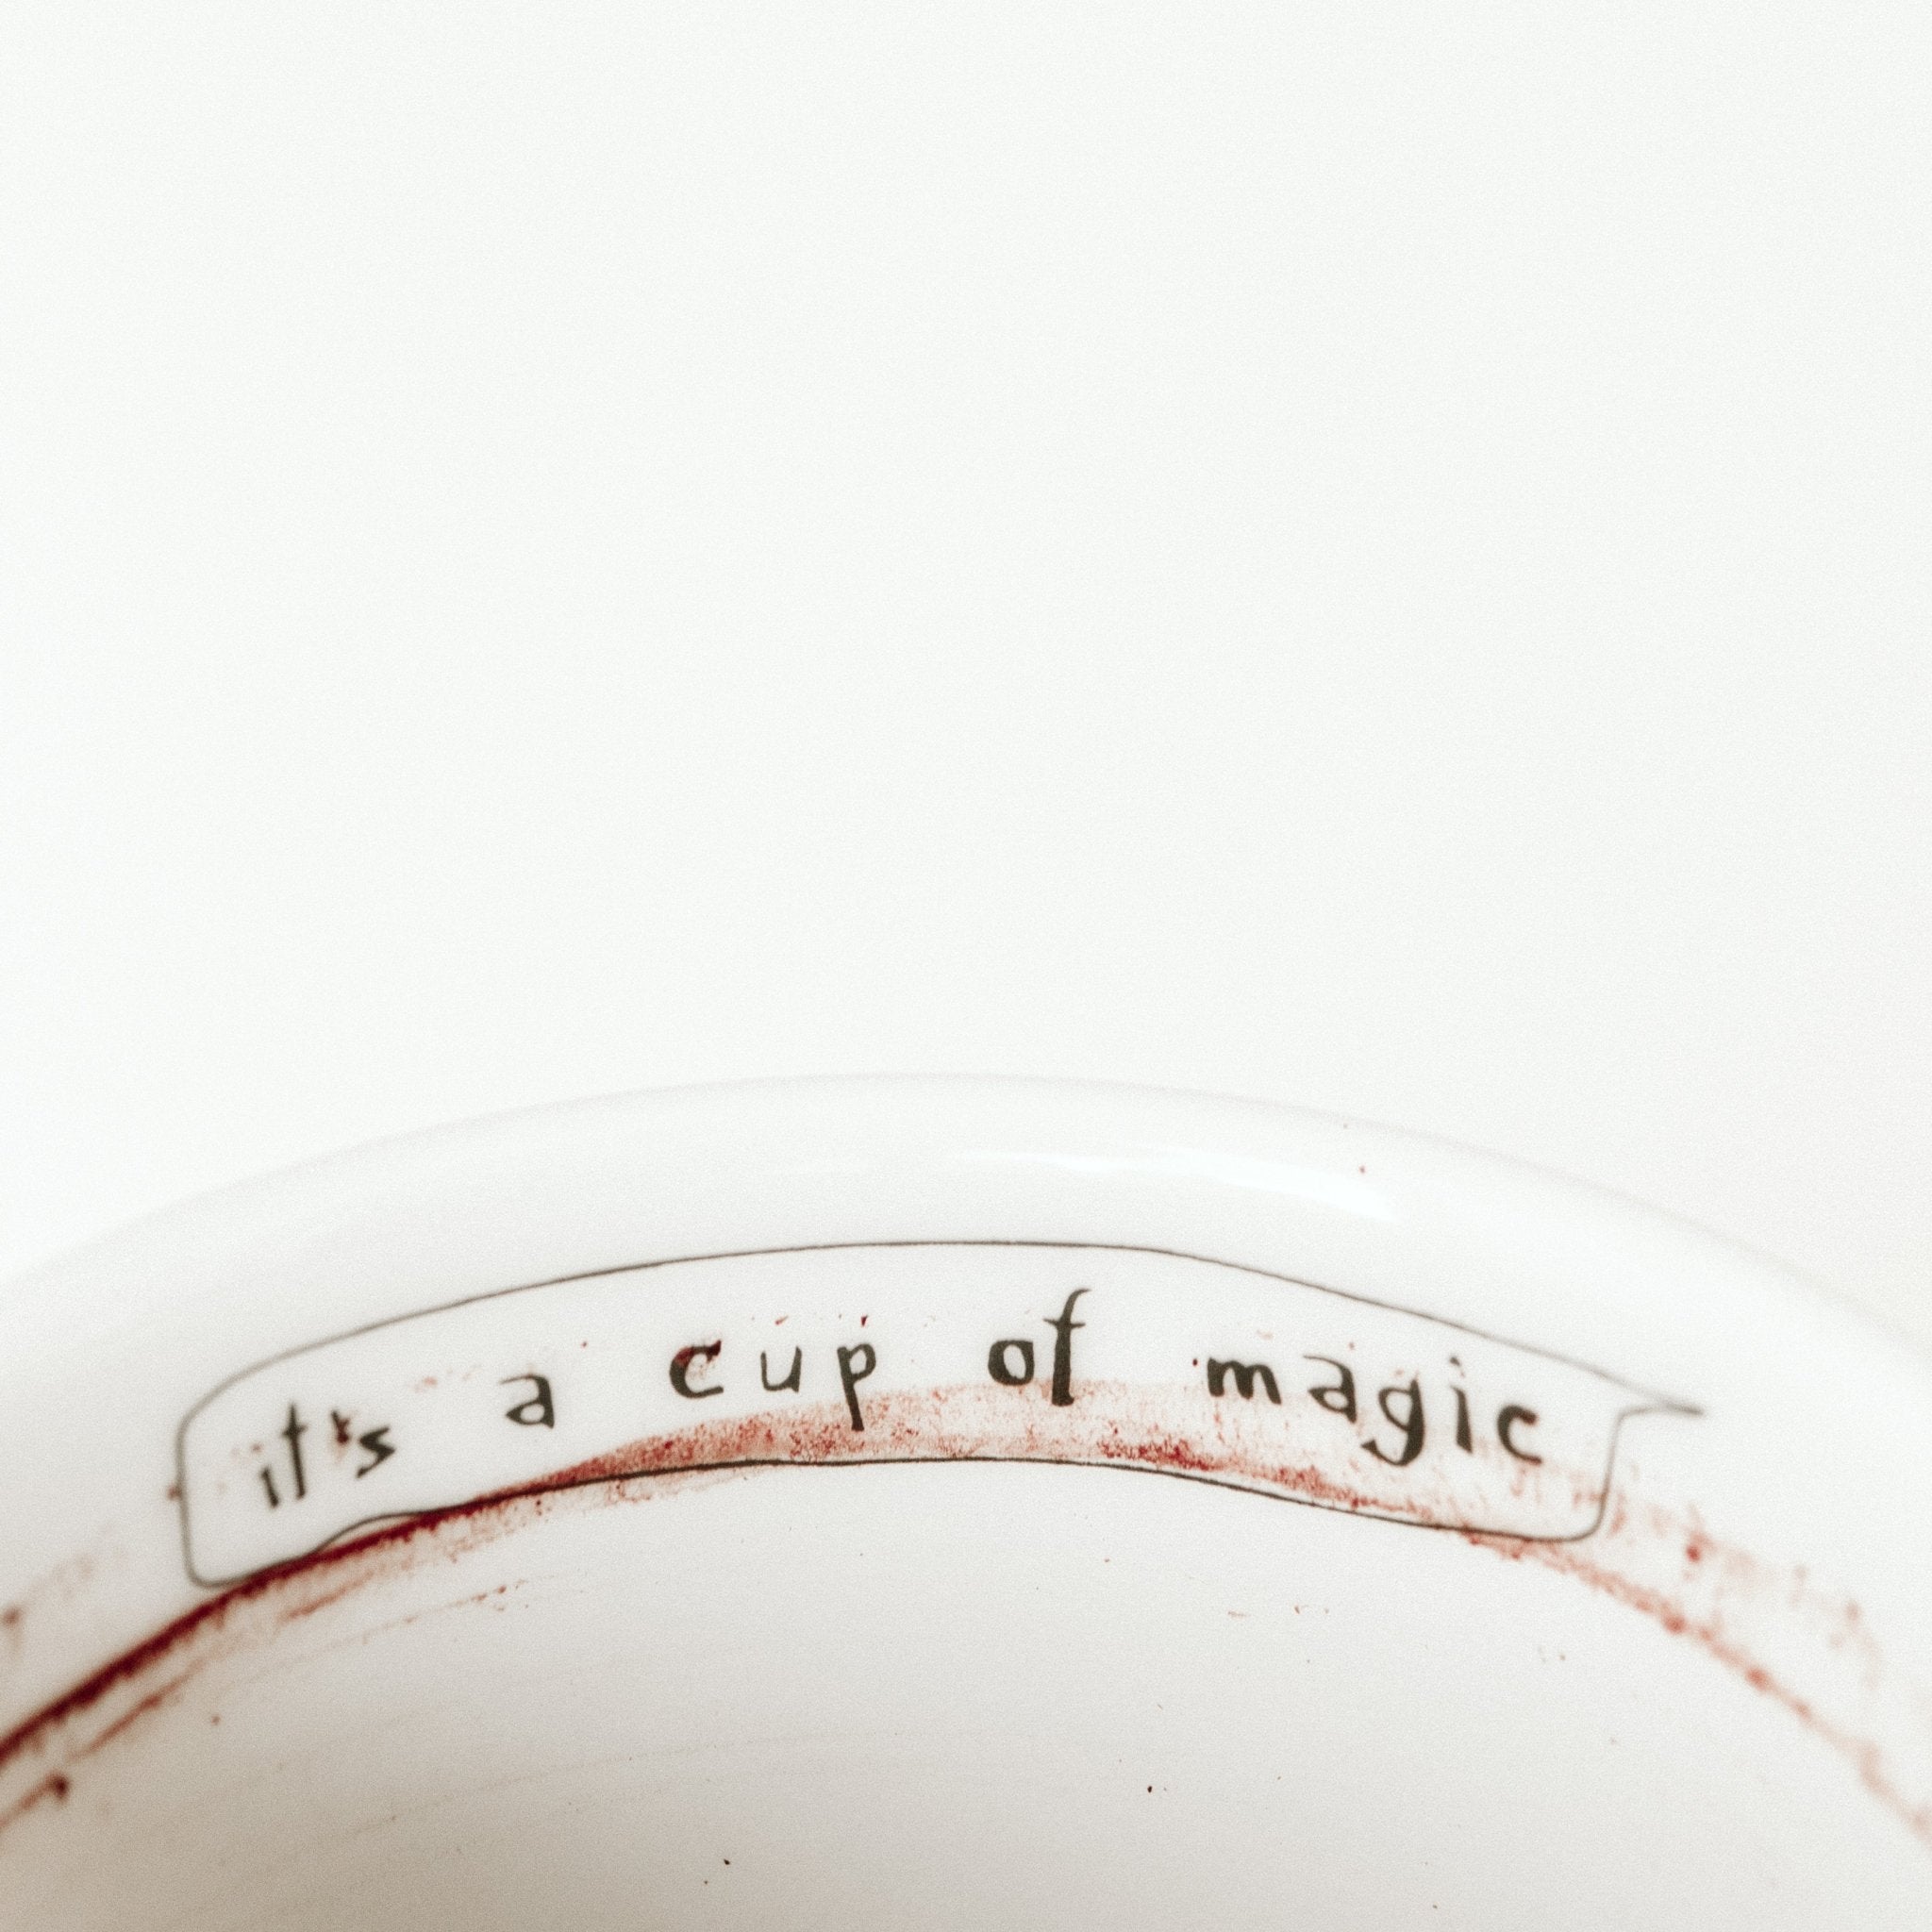 Porcelain cup inspired by Freddie Mercury text inside of the cup